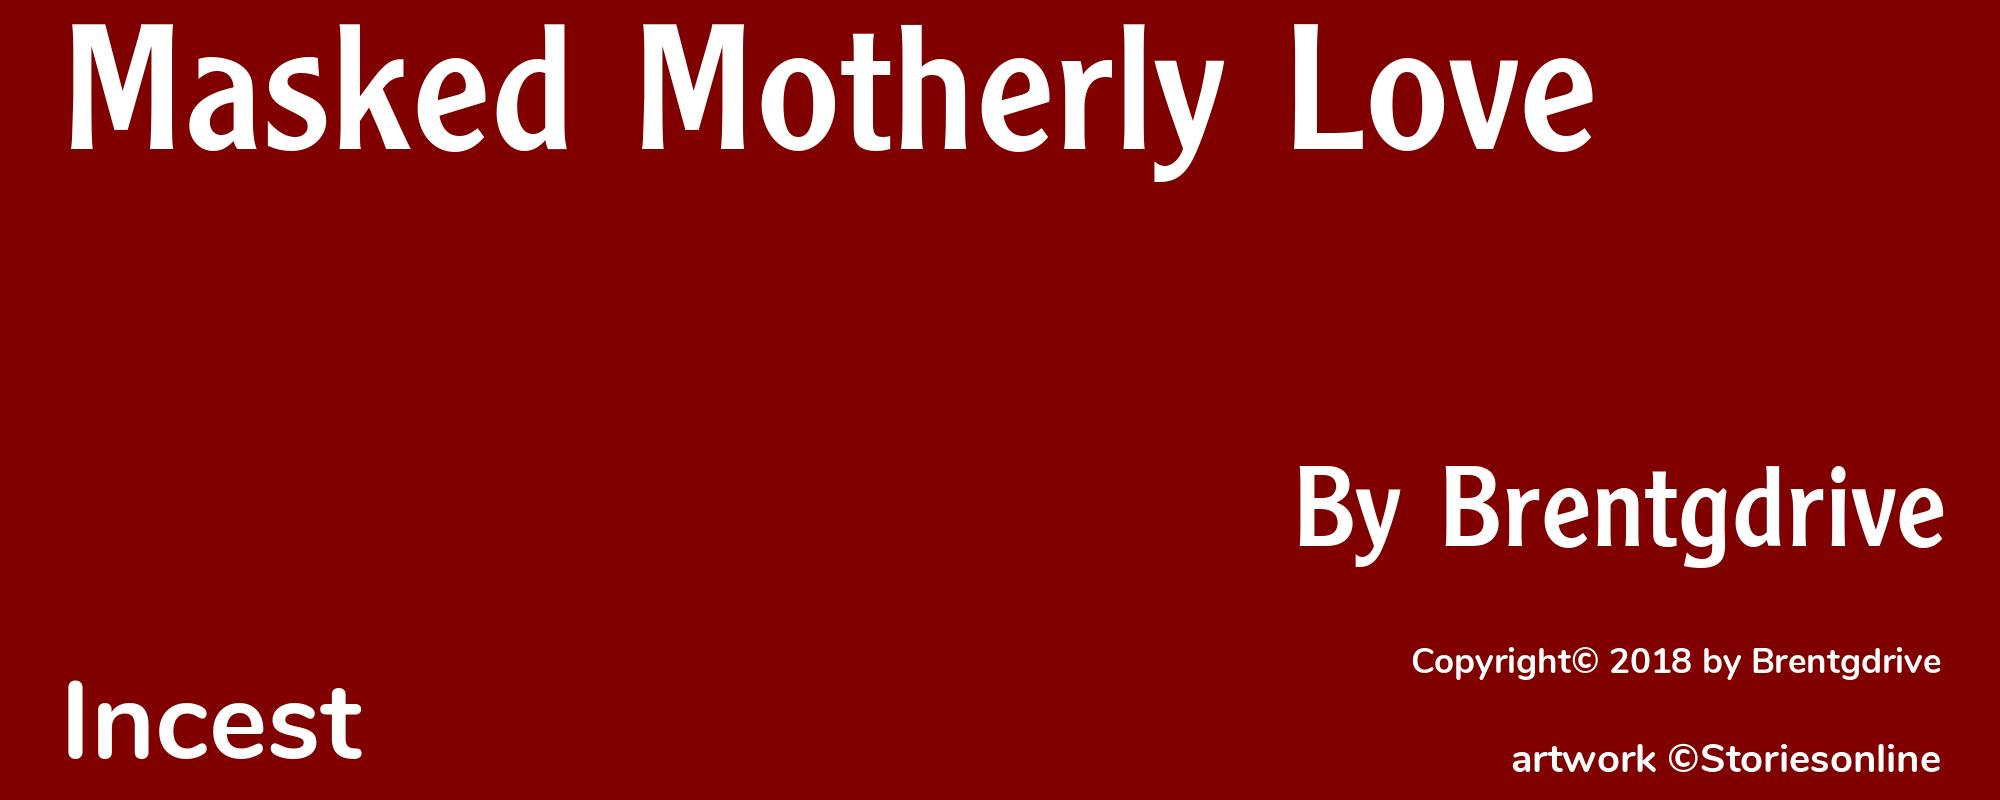 Masked Motherly Love - Cover